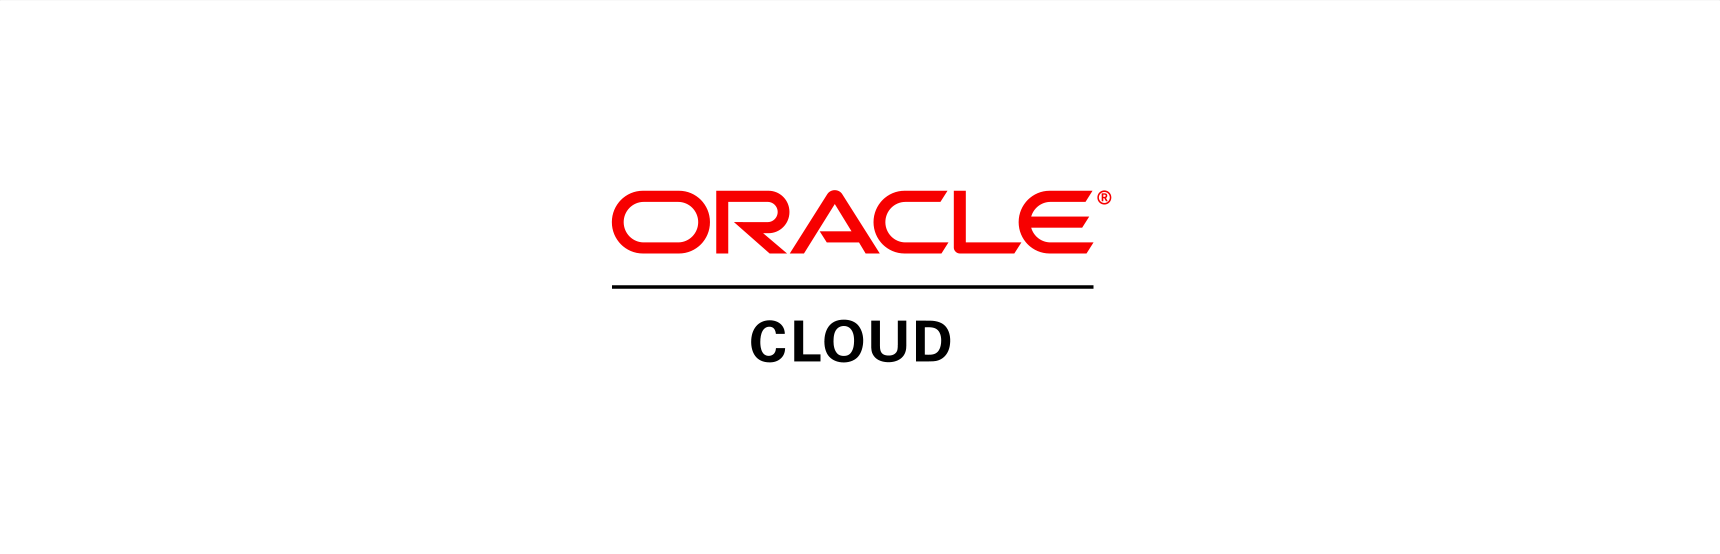 Oracle Cloud - First Encounter